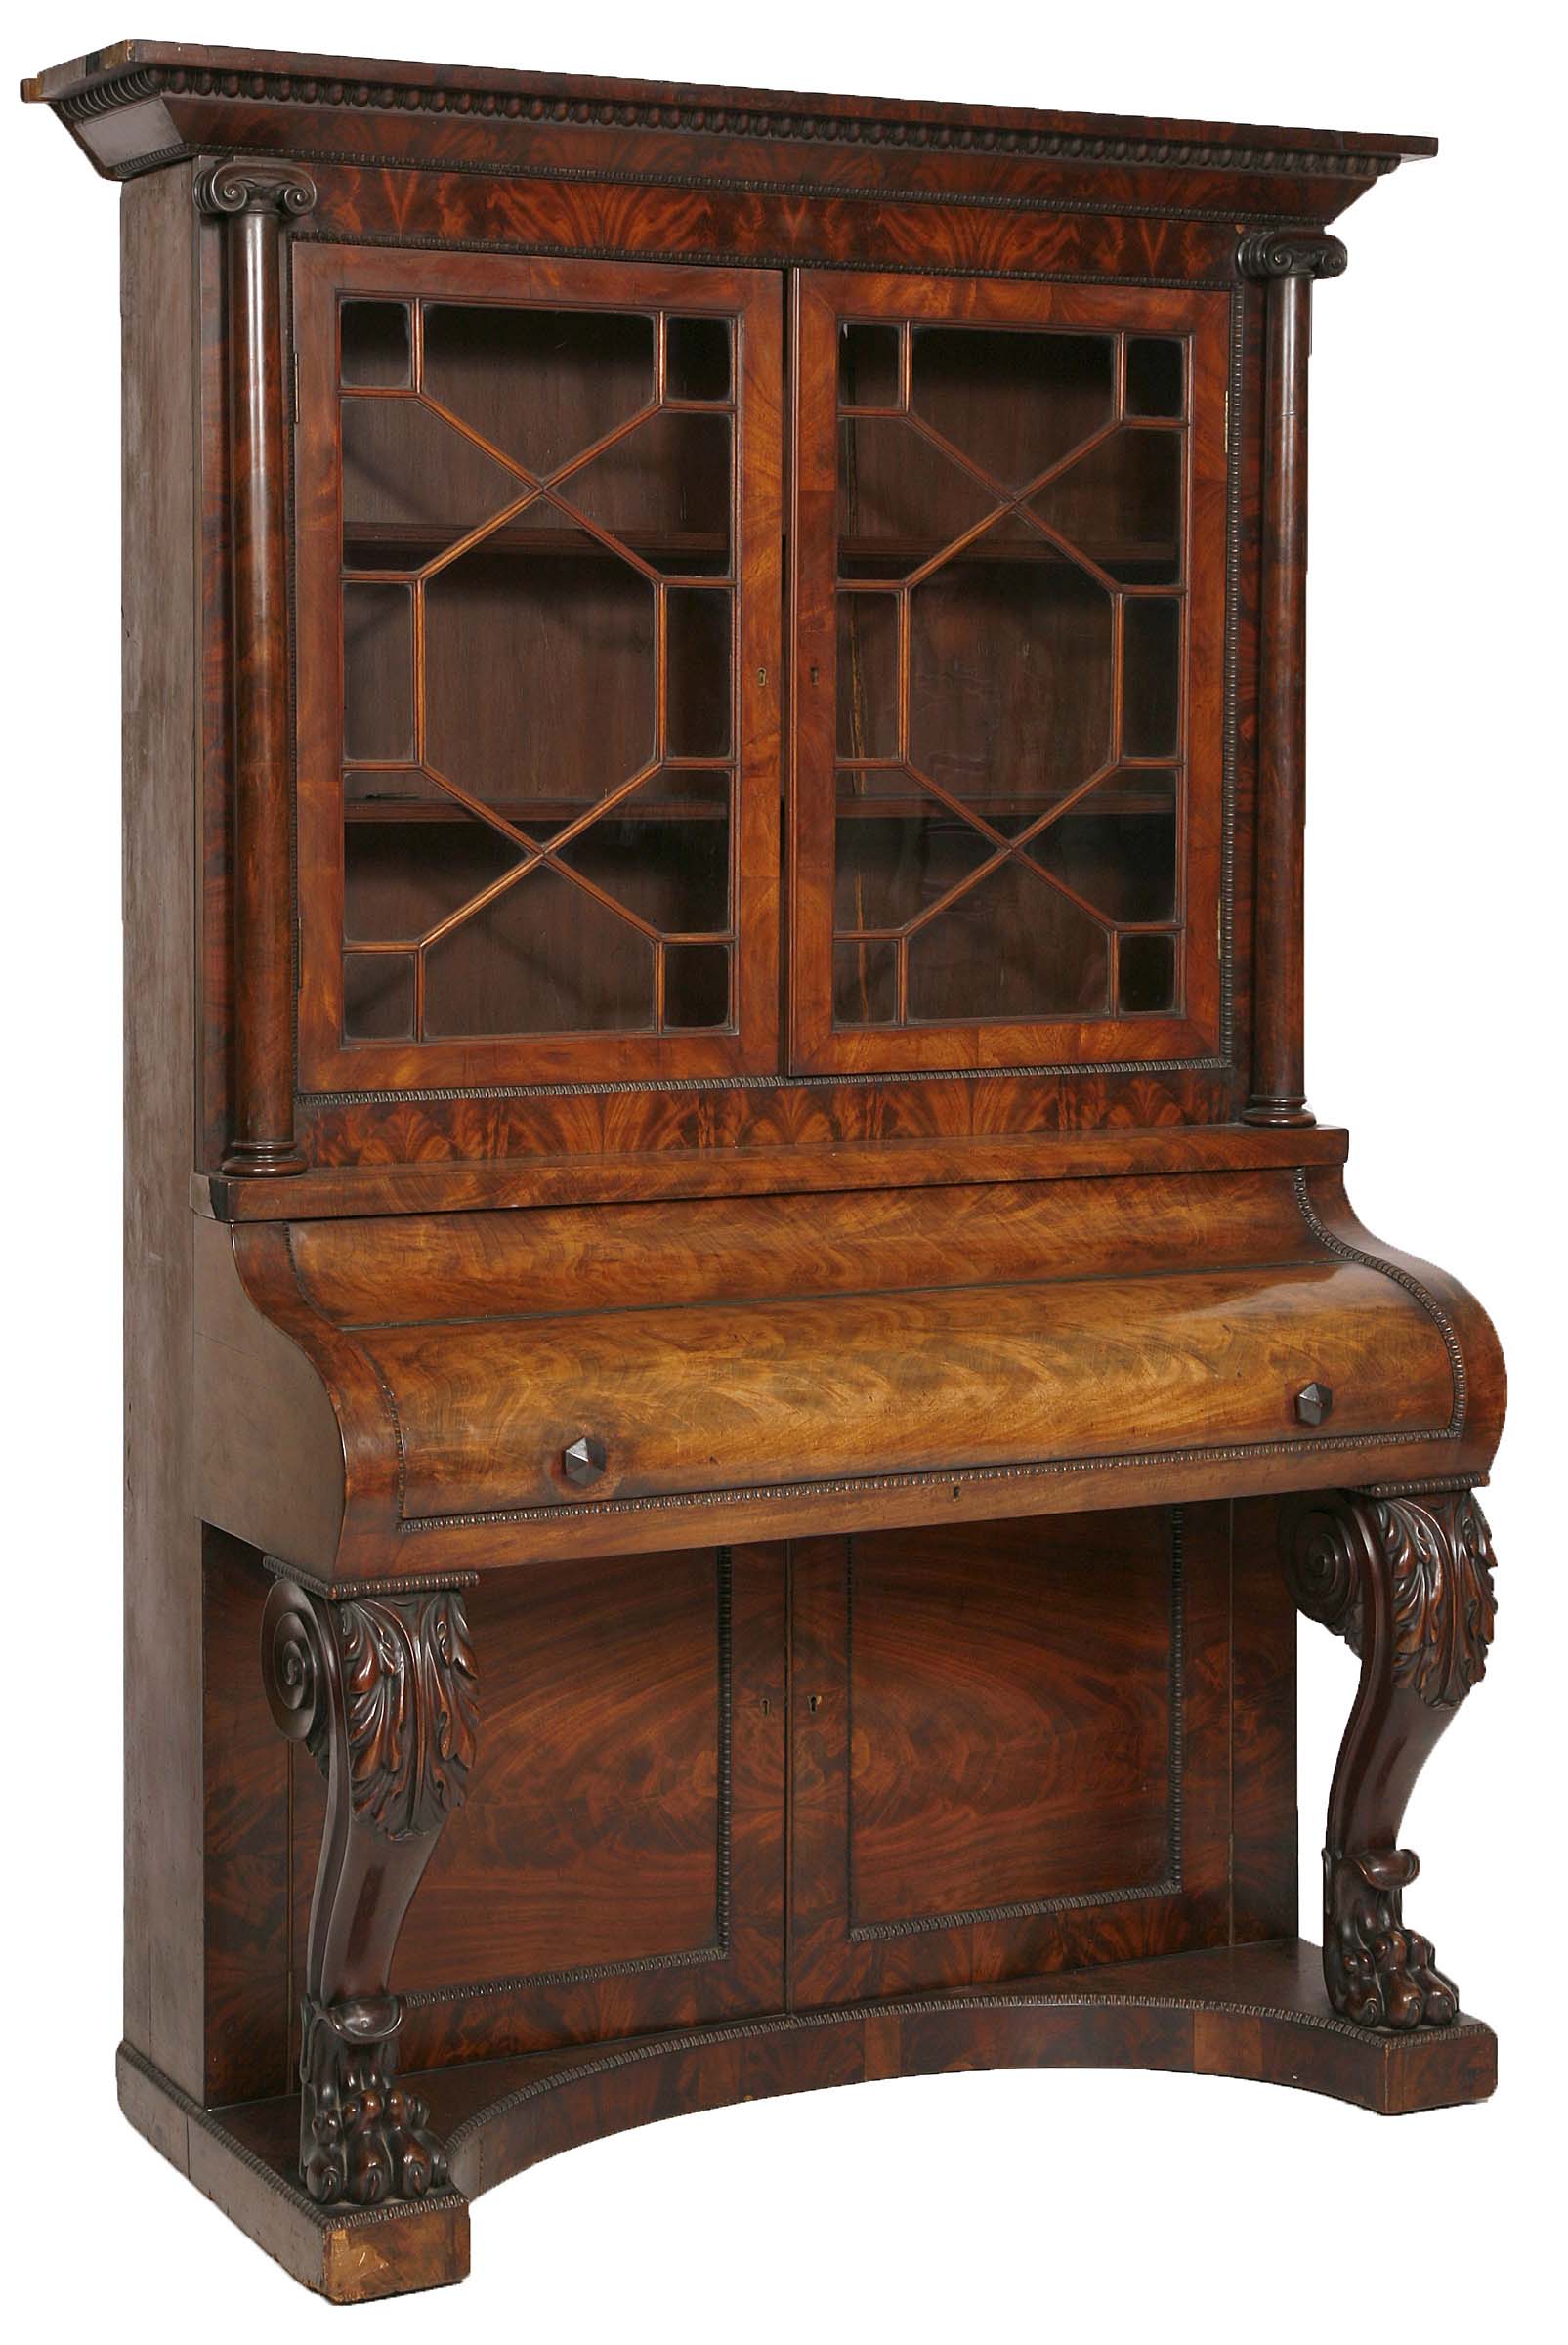 A FLAMED MAHOGANY PIANO BOOKCASE,
c.1840, with moulded egg and dart cornice and nulled rim, above